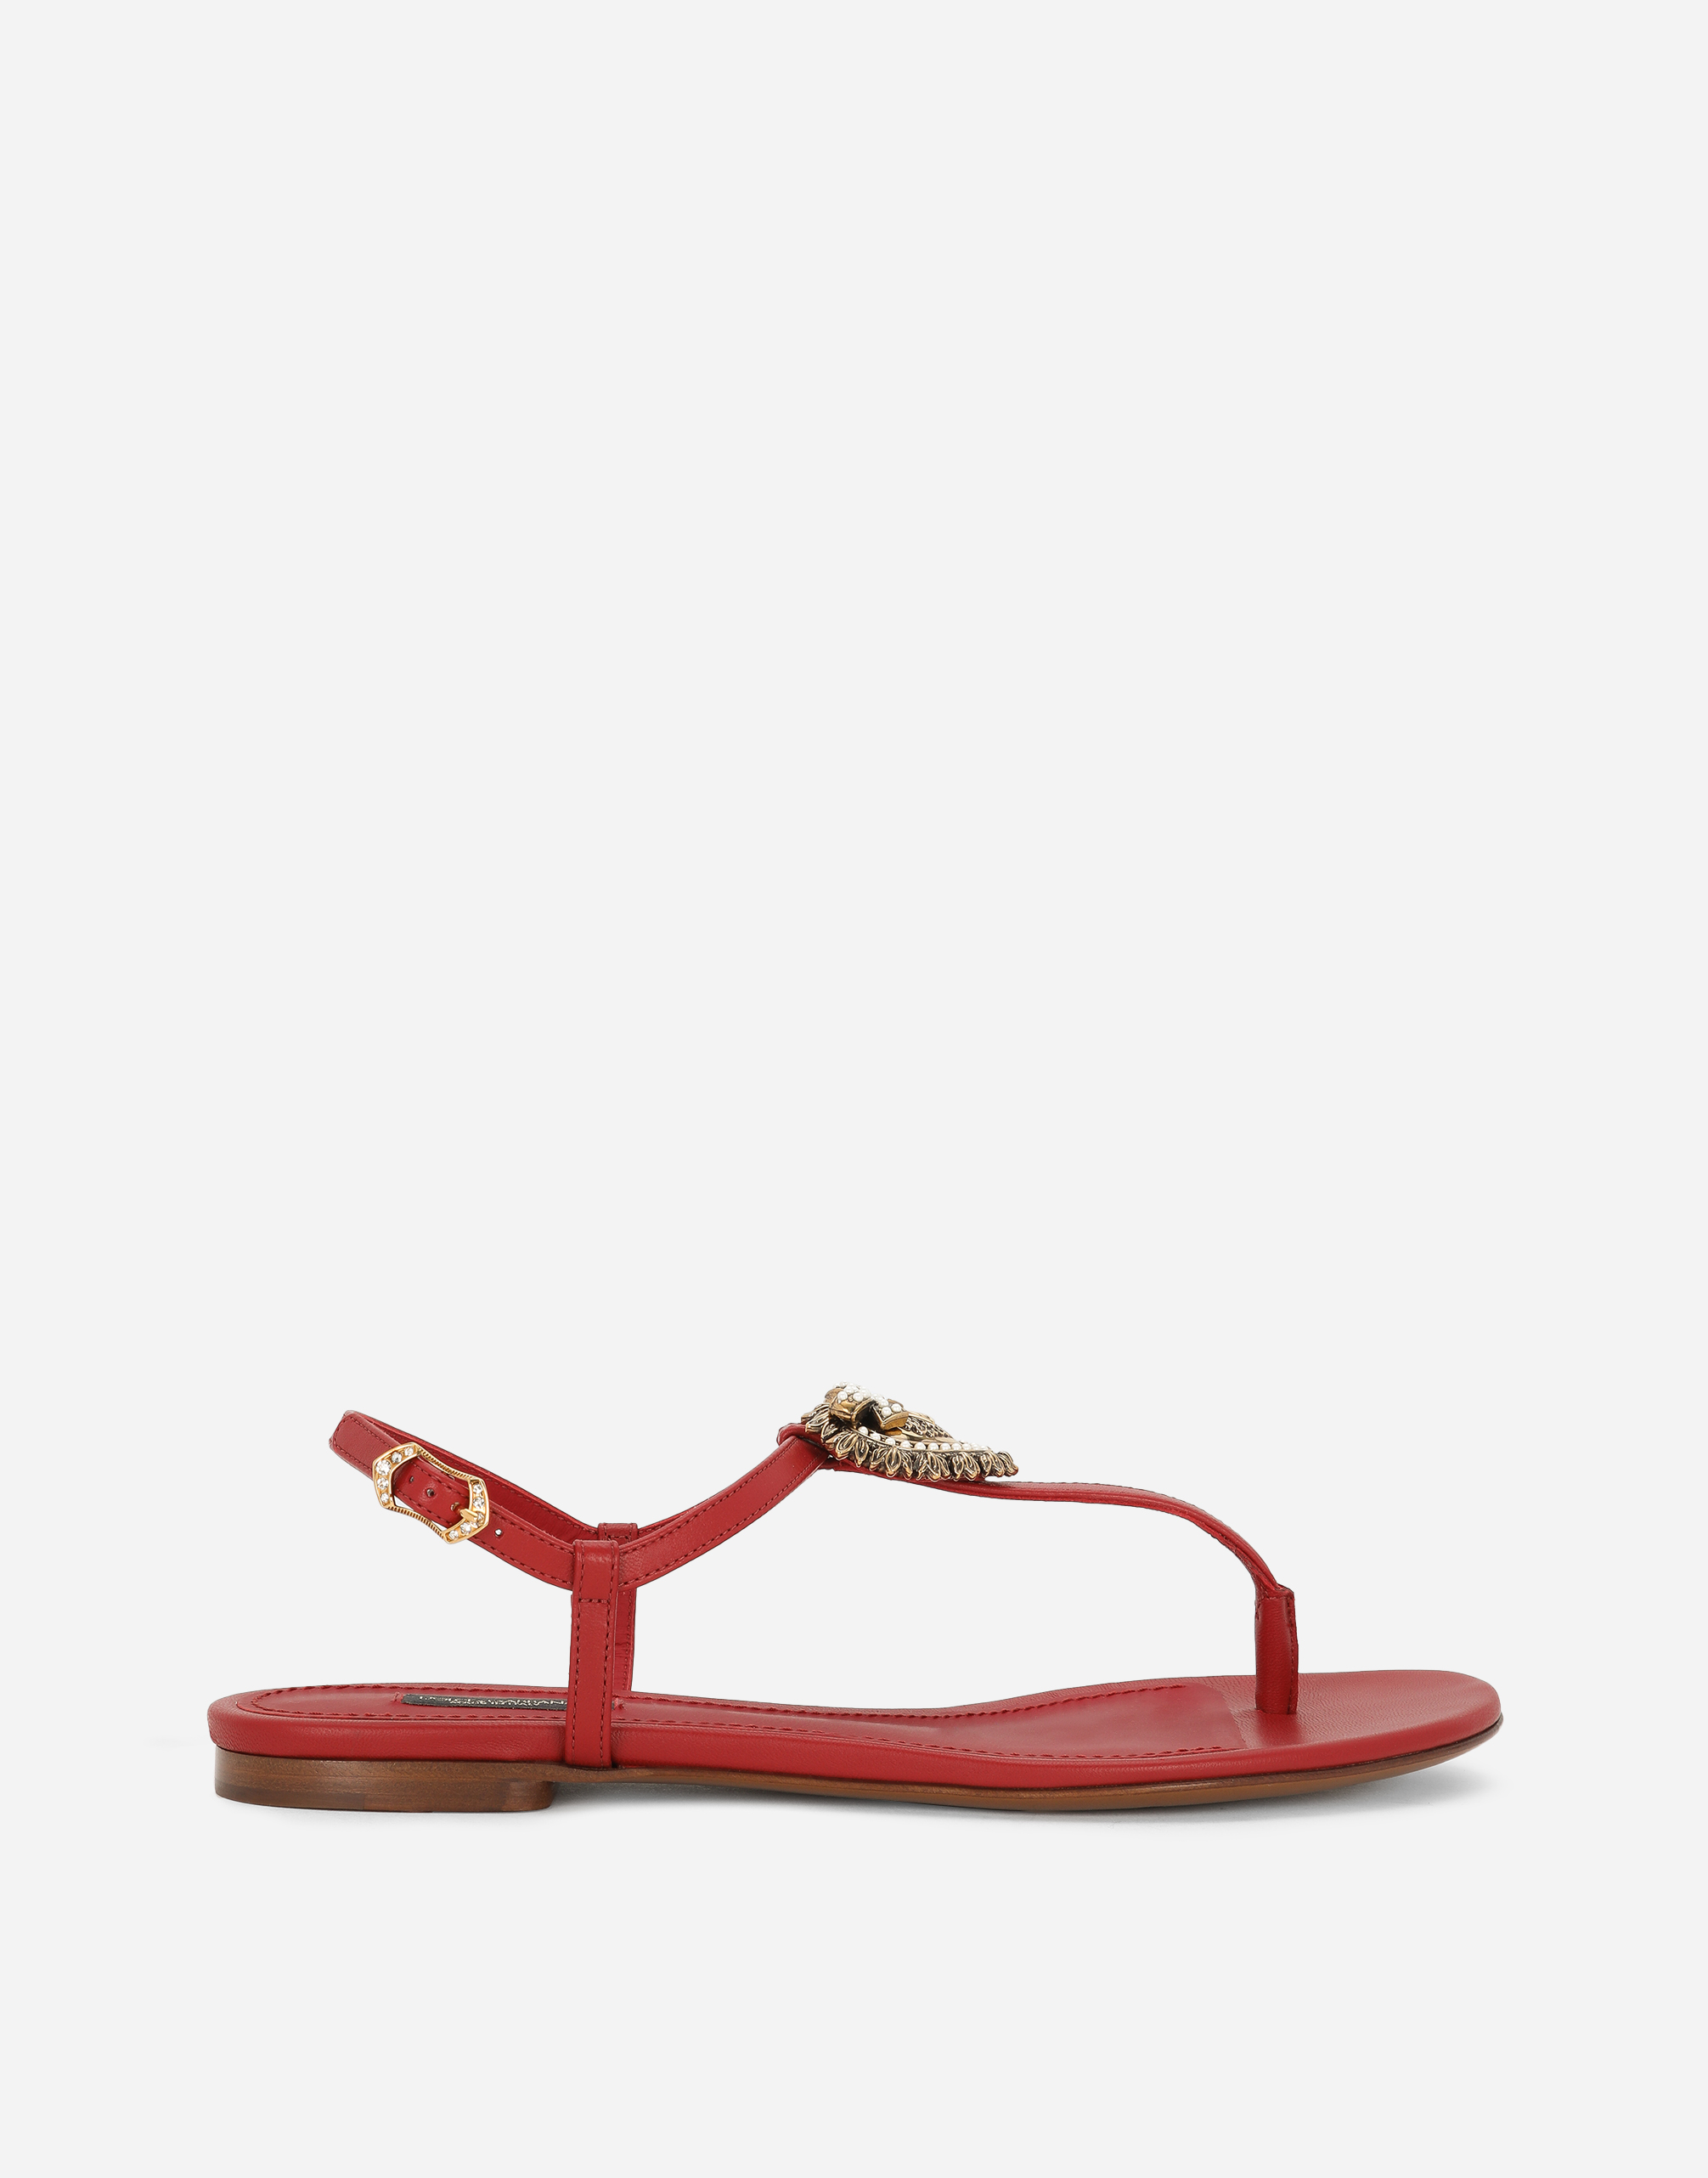 Dolce & Gabbana Nappa Leather Devotion Thong Sandals In Red